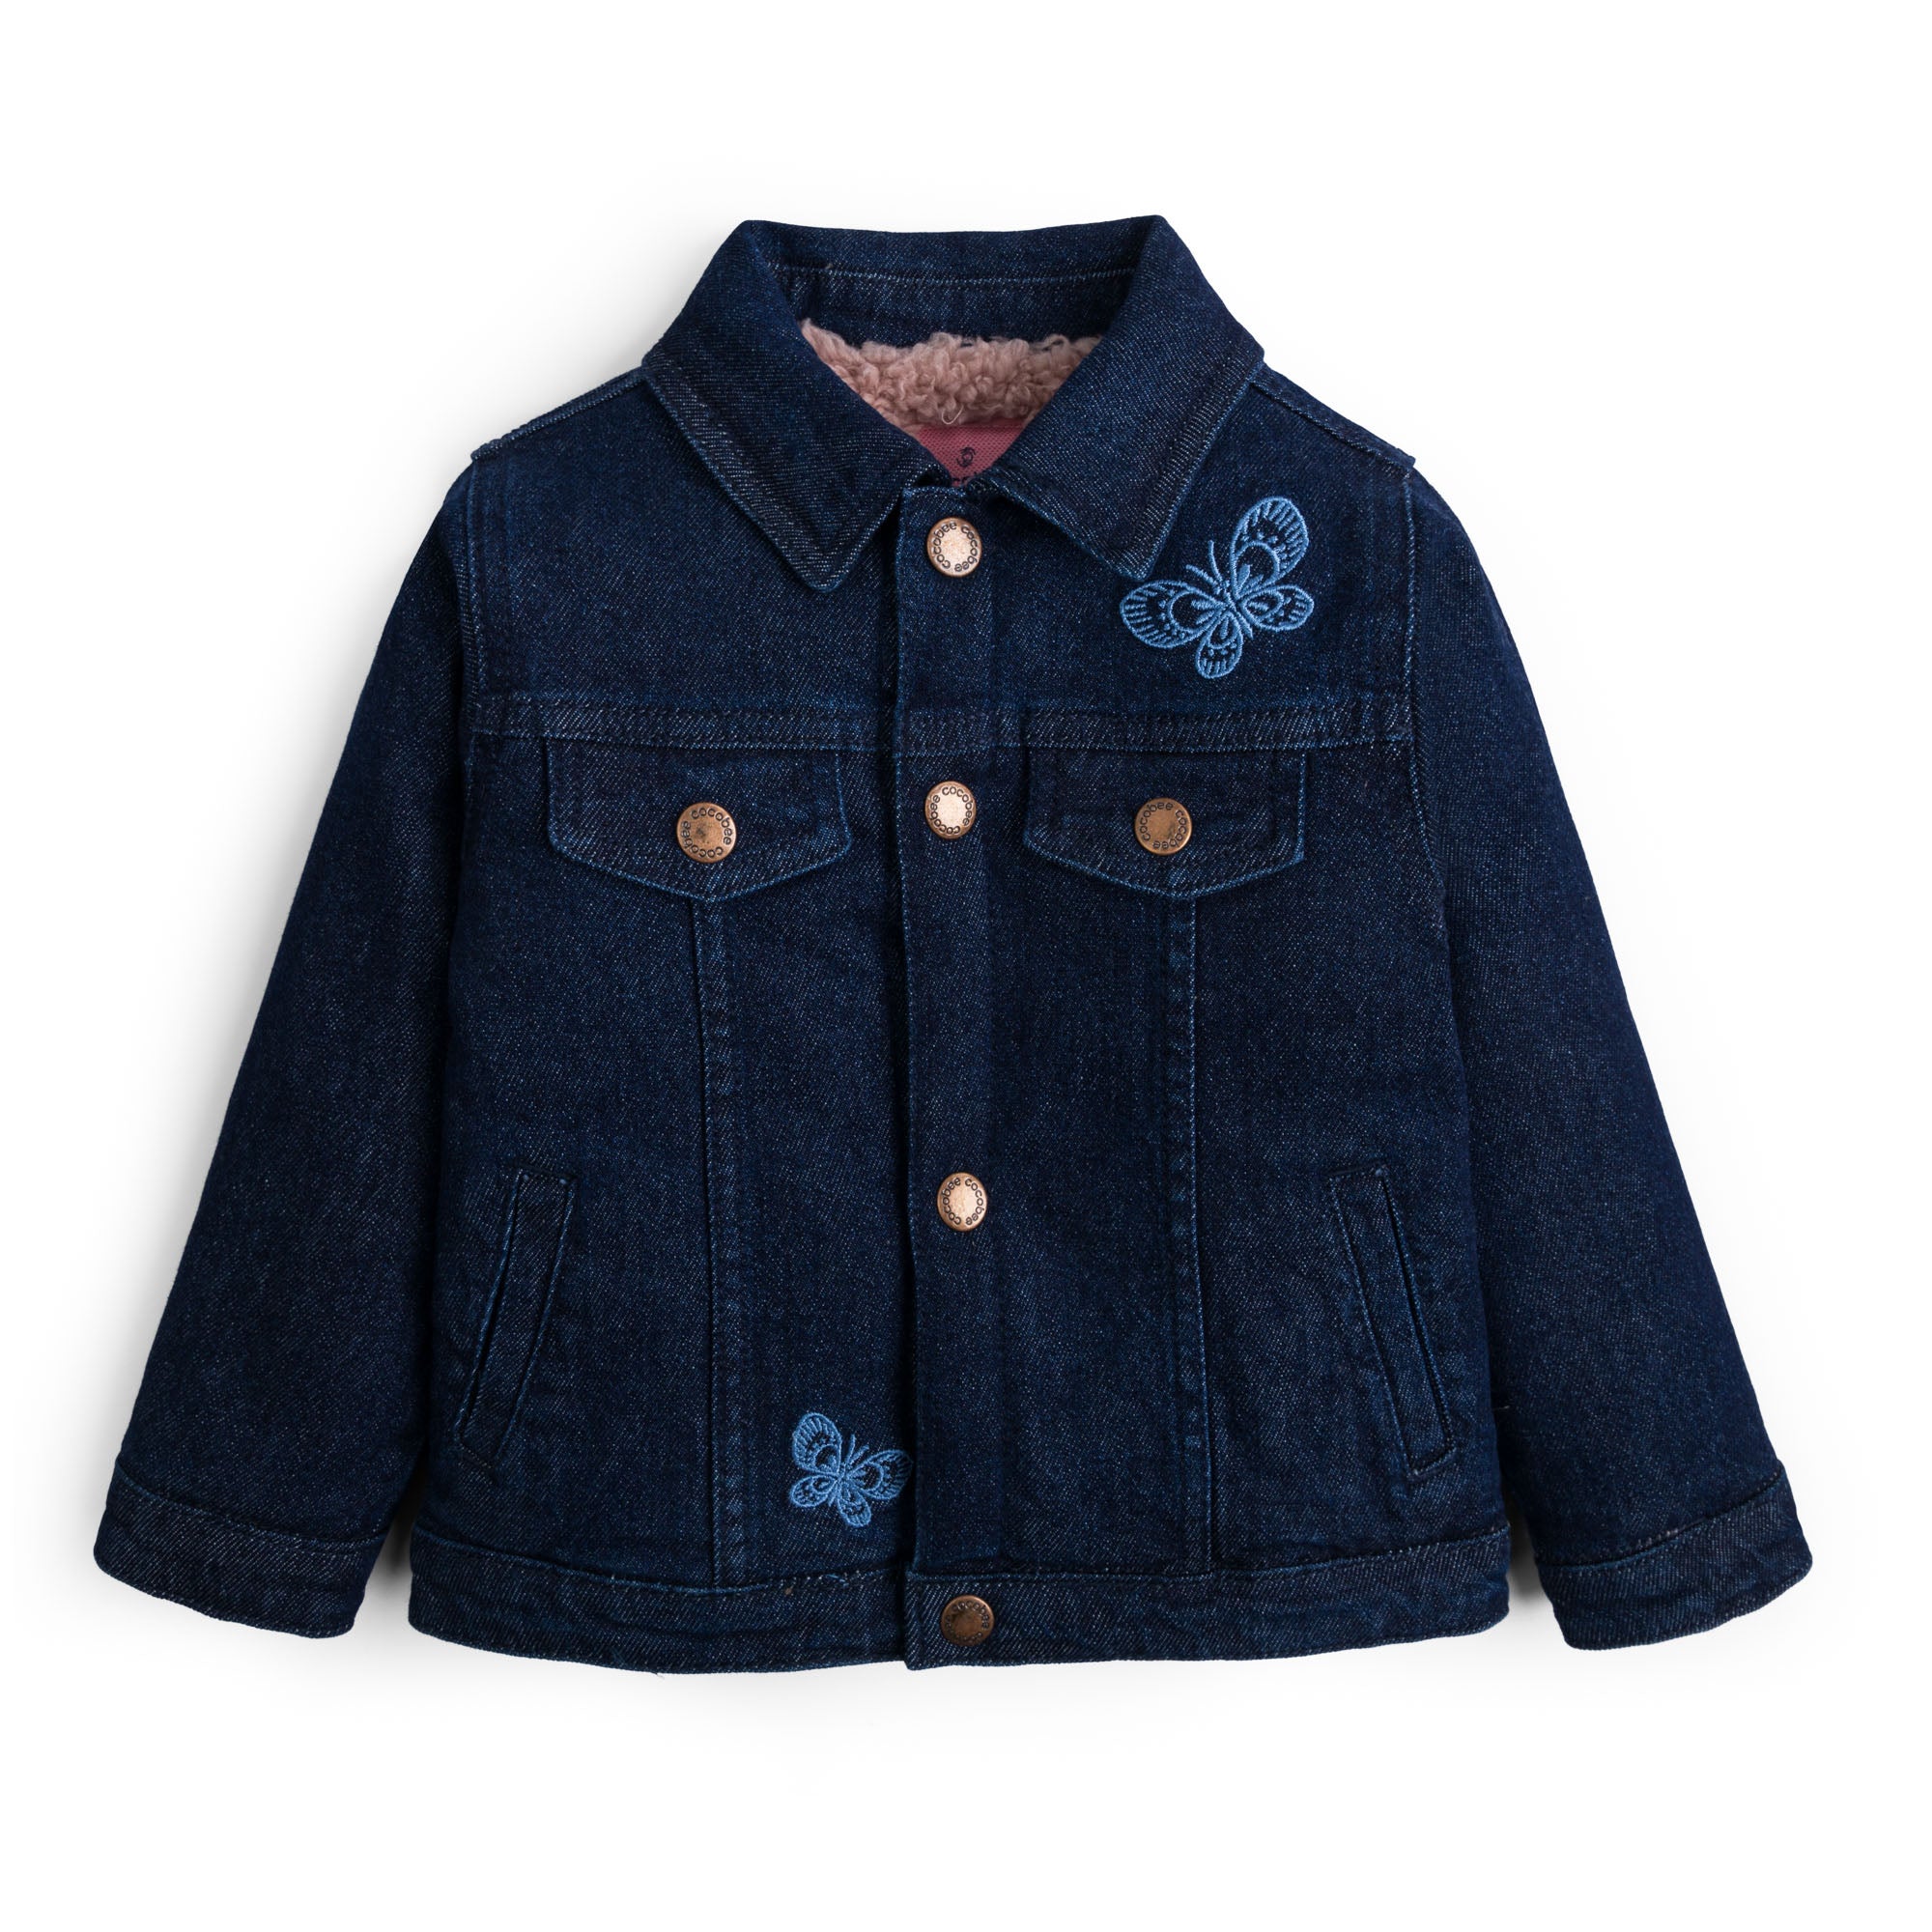 Butterfly embroidered lined denim jacket